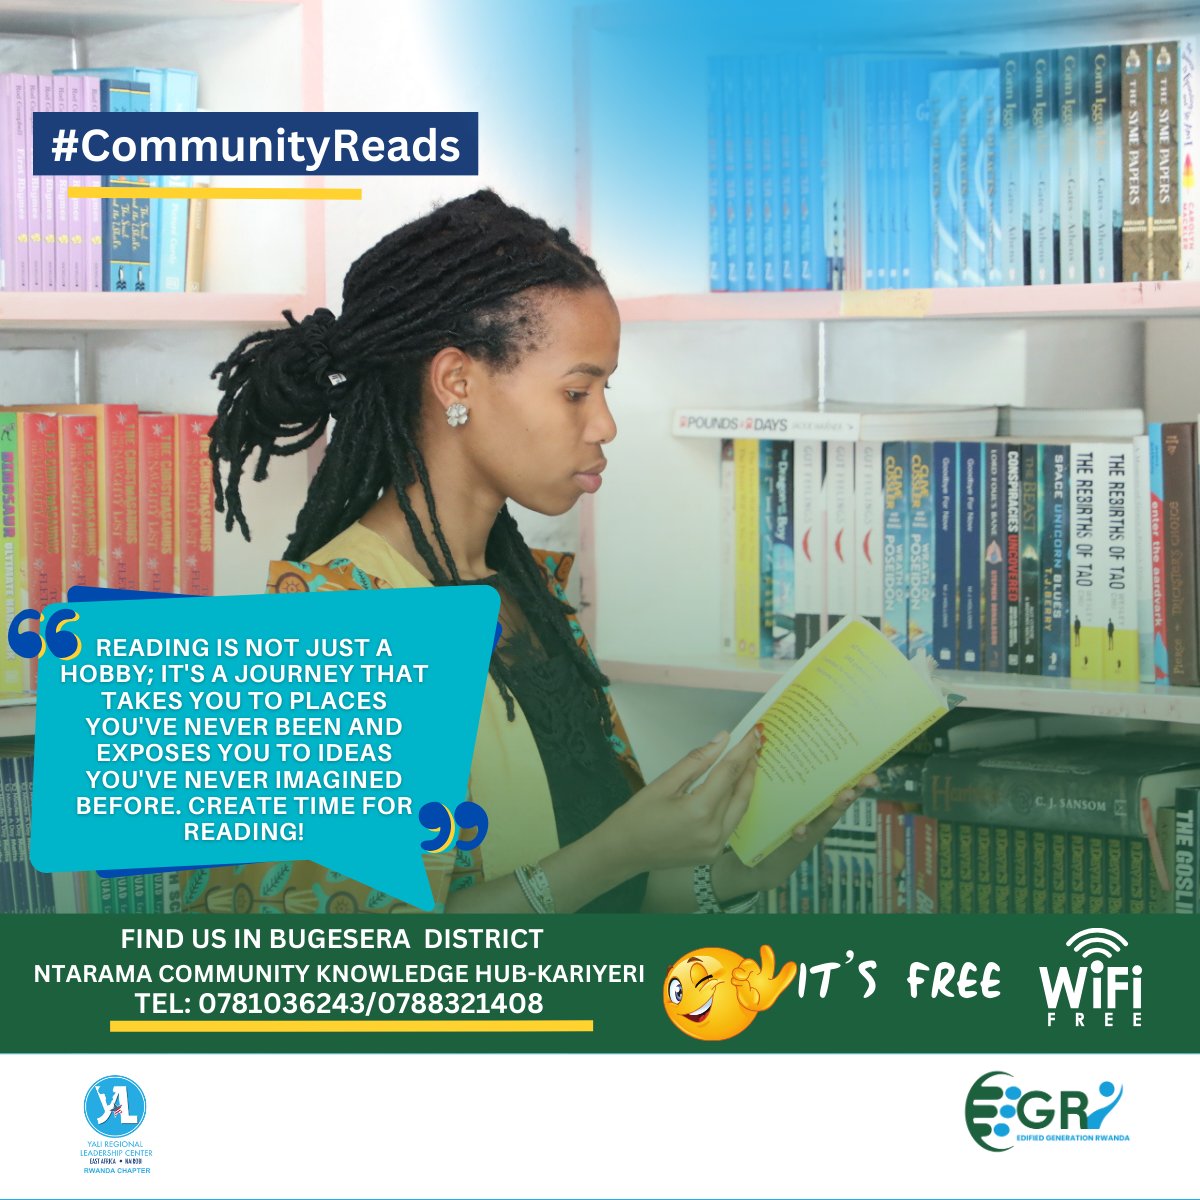 Embarking on a journey through the pages of a book is more than just a hobby, it's an adventure waiting to be discovered. Reading is Power, Never Stop Learning! #CommunityReads